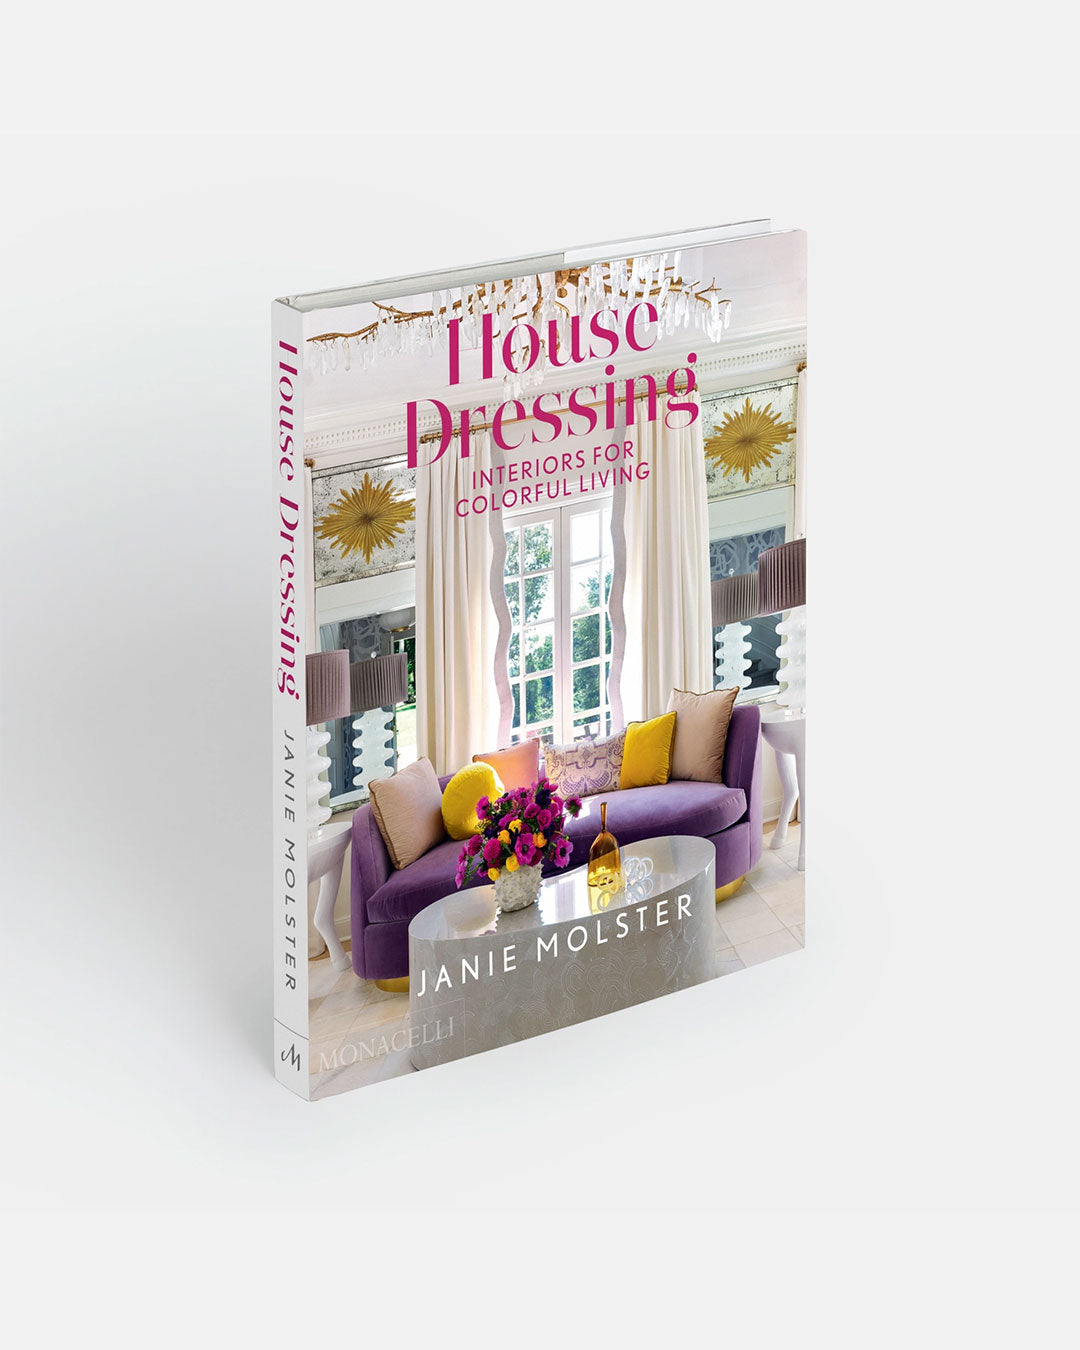 House Dressing: Interiors for Colorful Living by Janie Molster